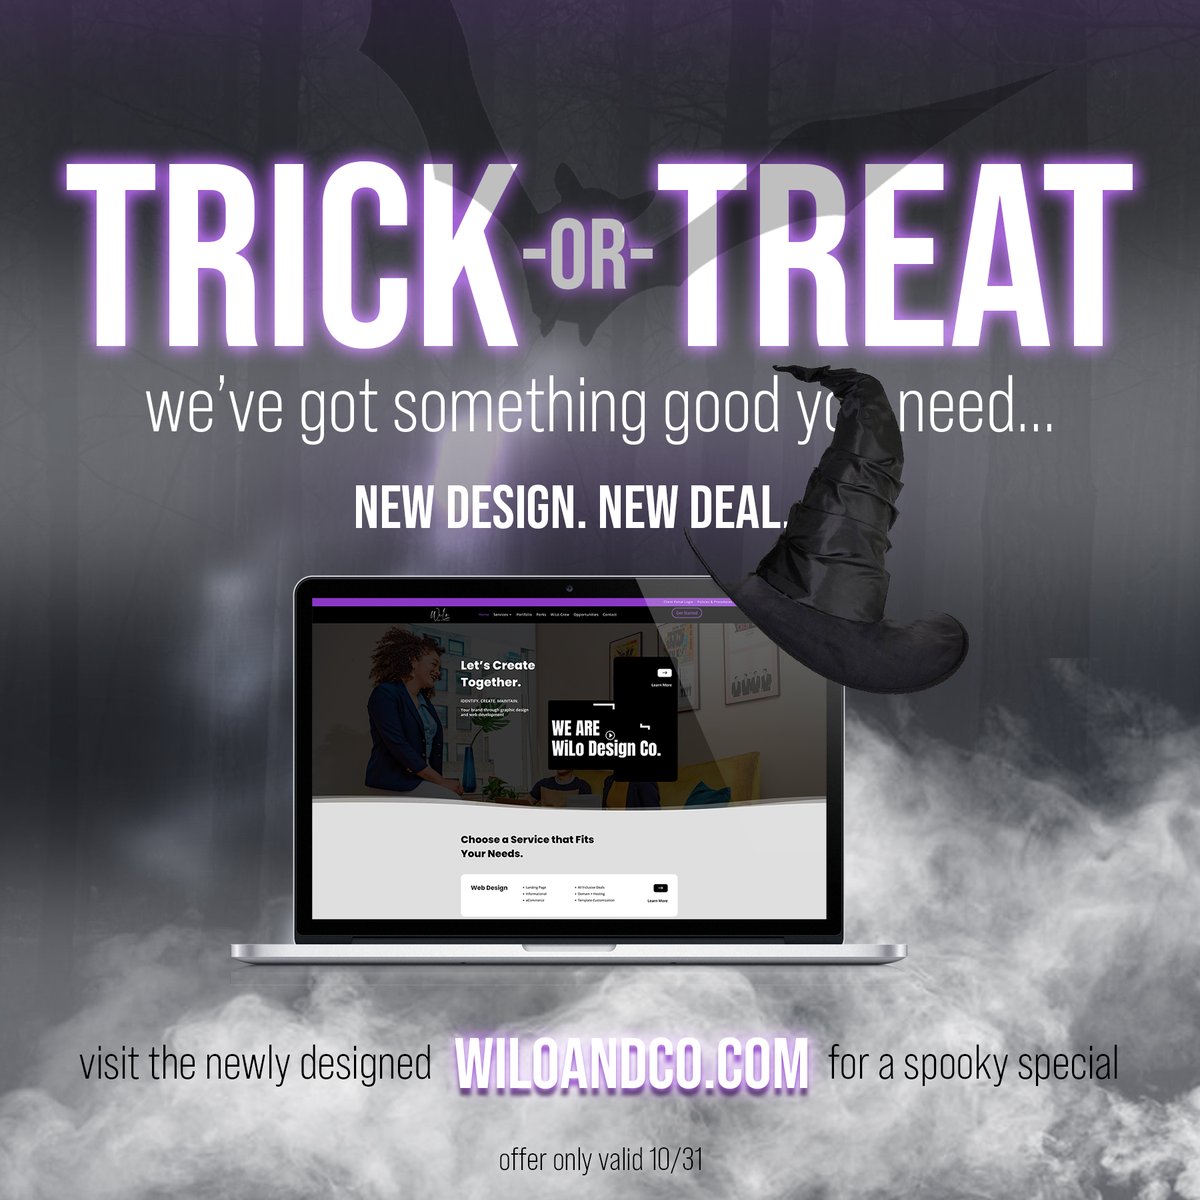 Happy Halloween! The new WiLo & Co website is live and we've got a spooky special deal waiting for you! Visit WiLoandco.com to check out the new website!